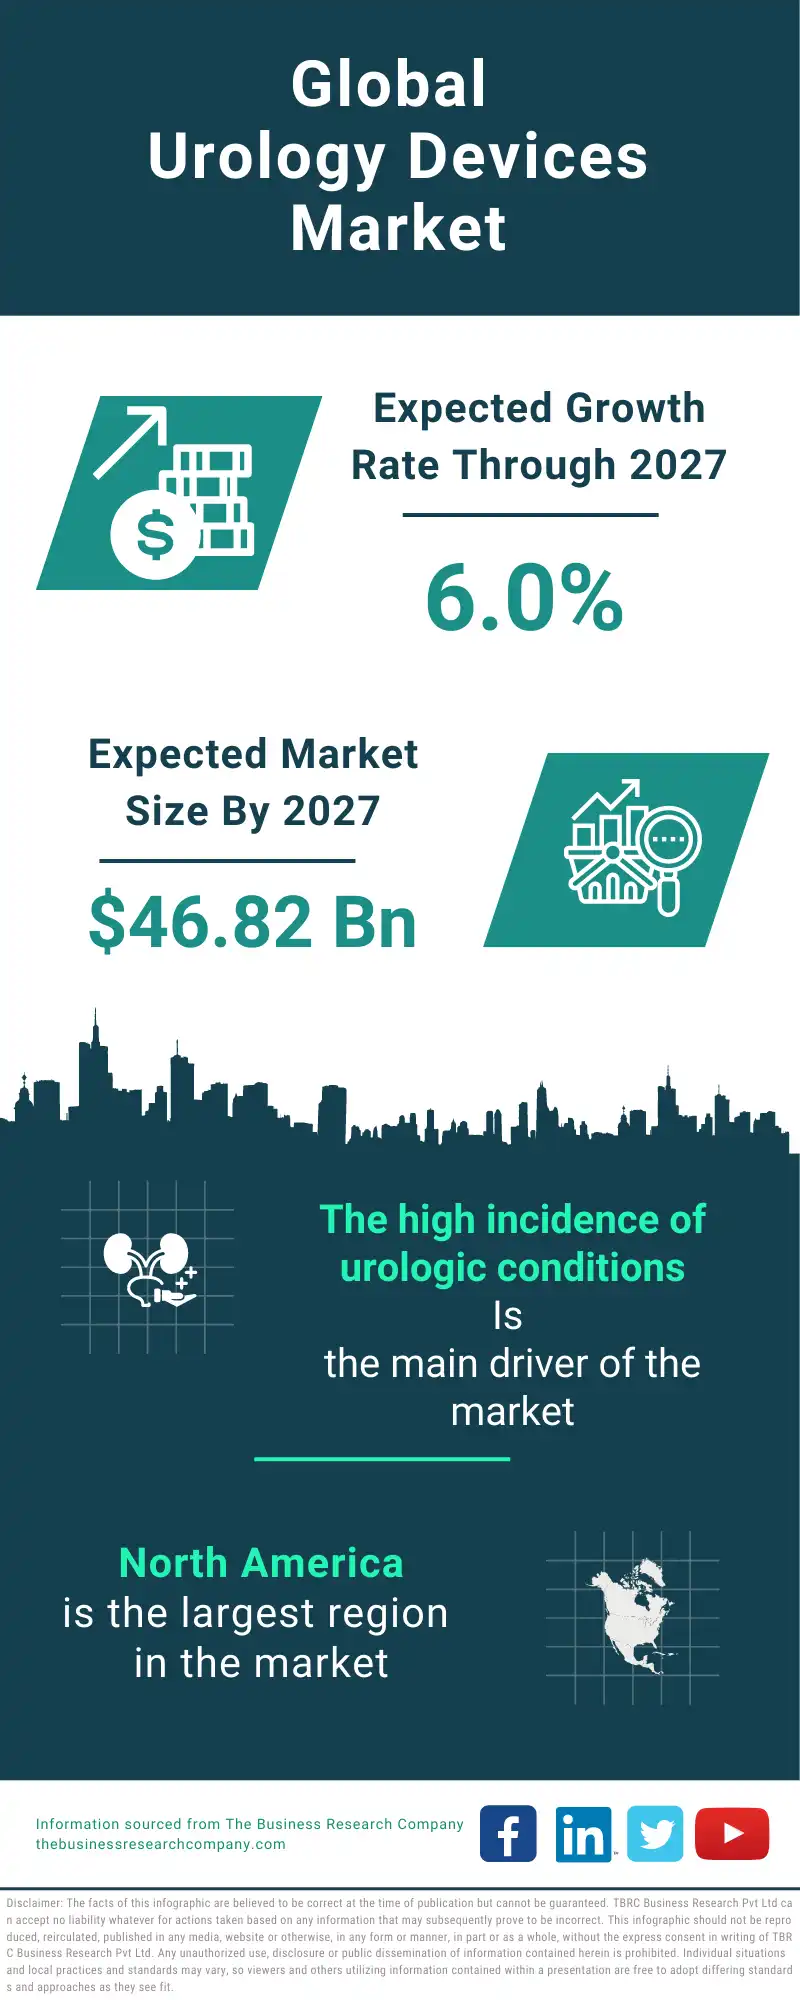 Urology Devices Global Market Report 2023